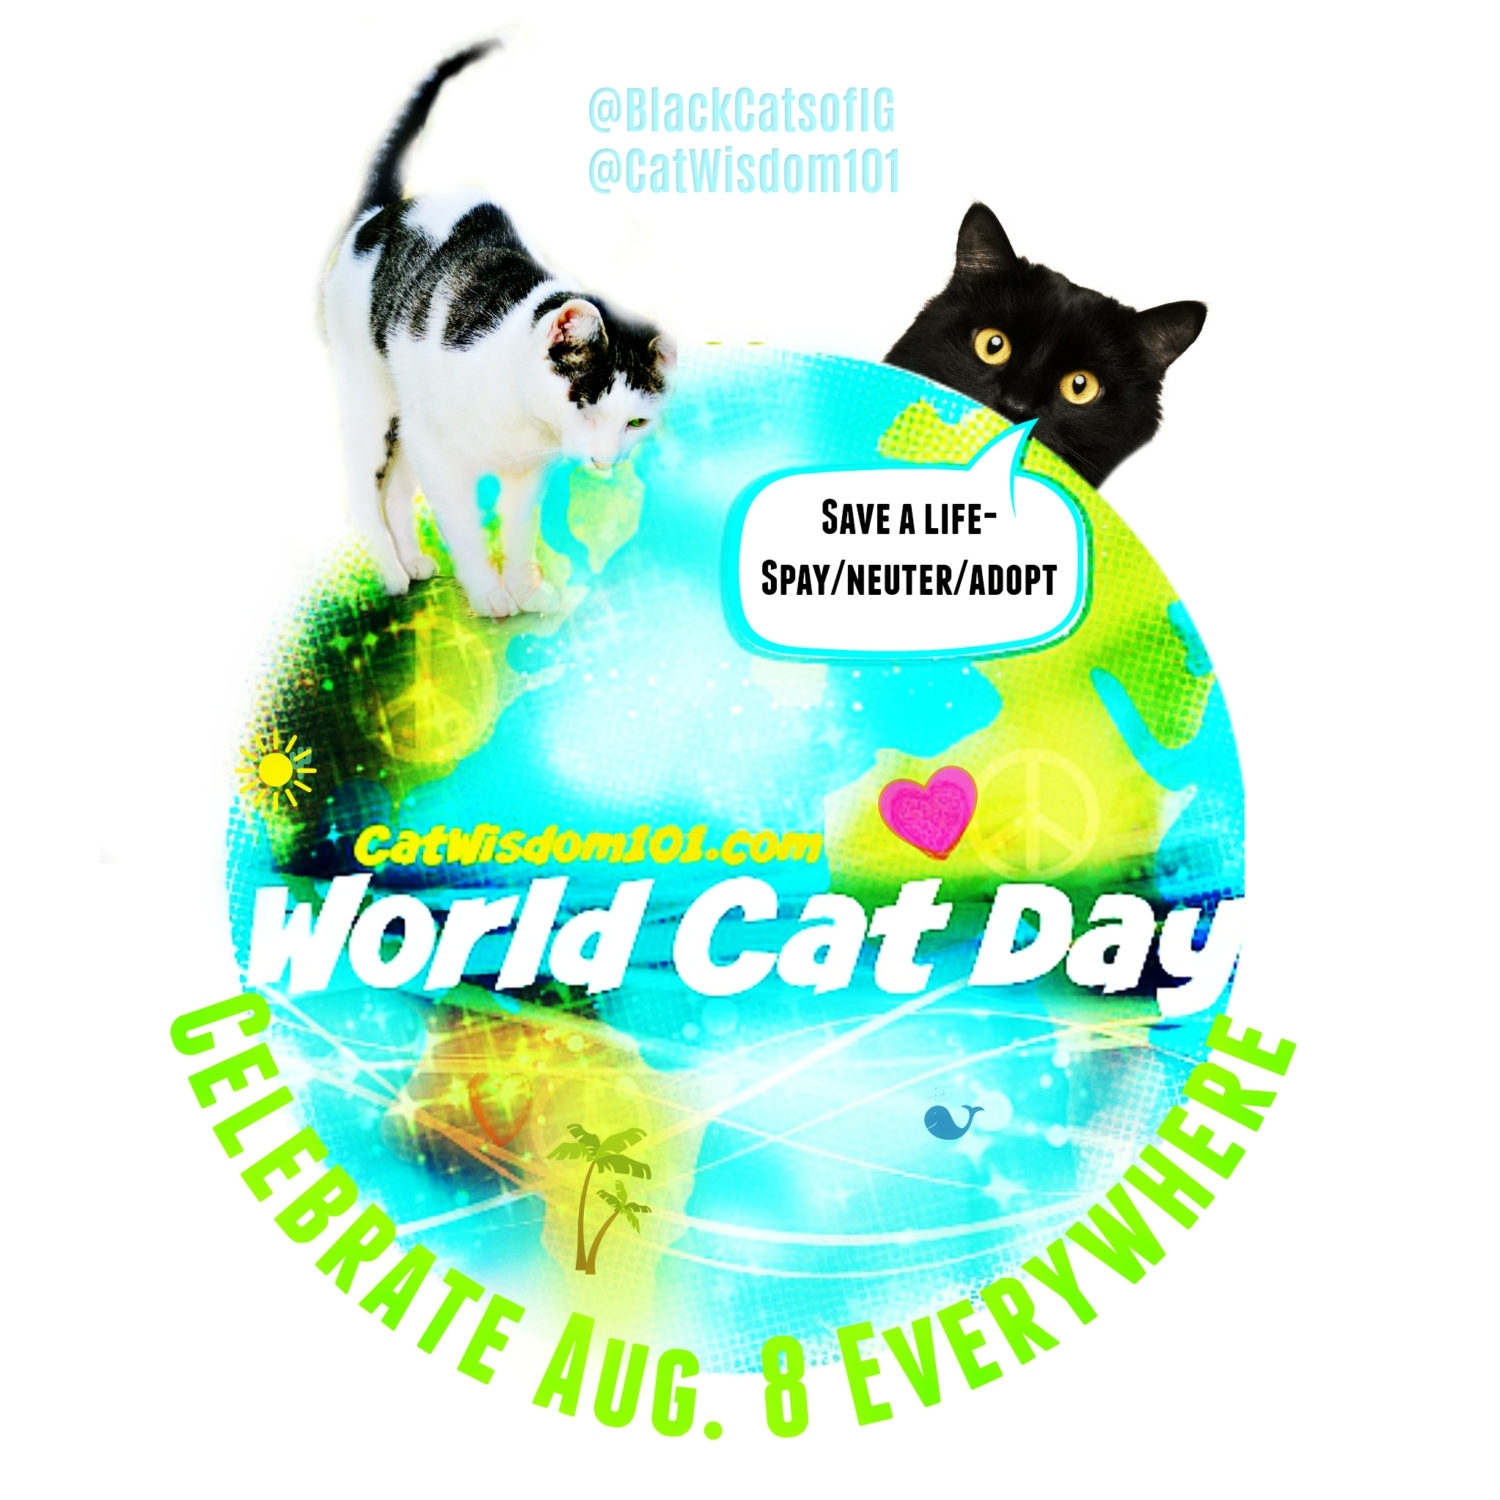 Take August 8 Cat Day